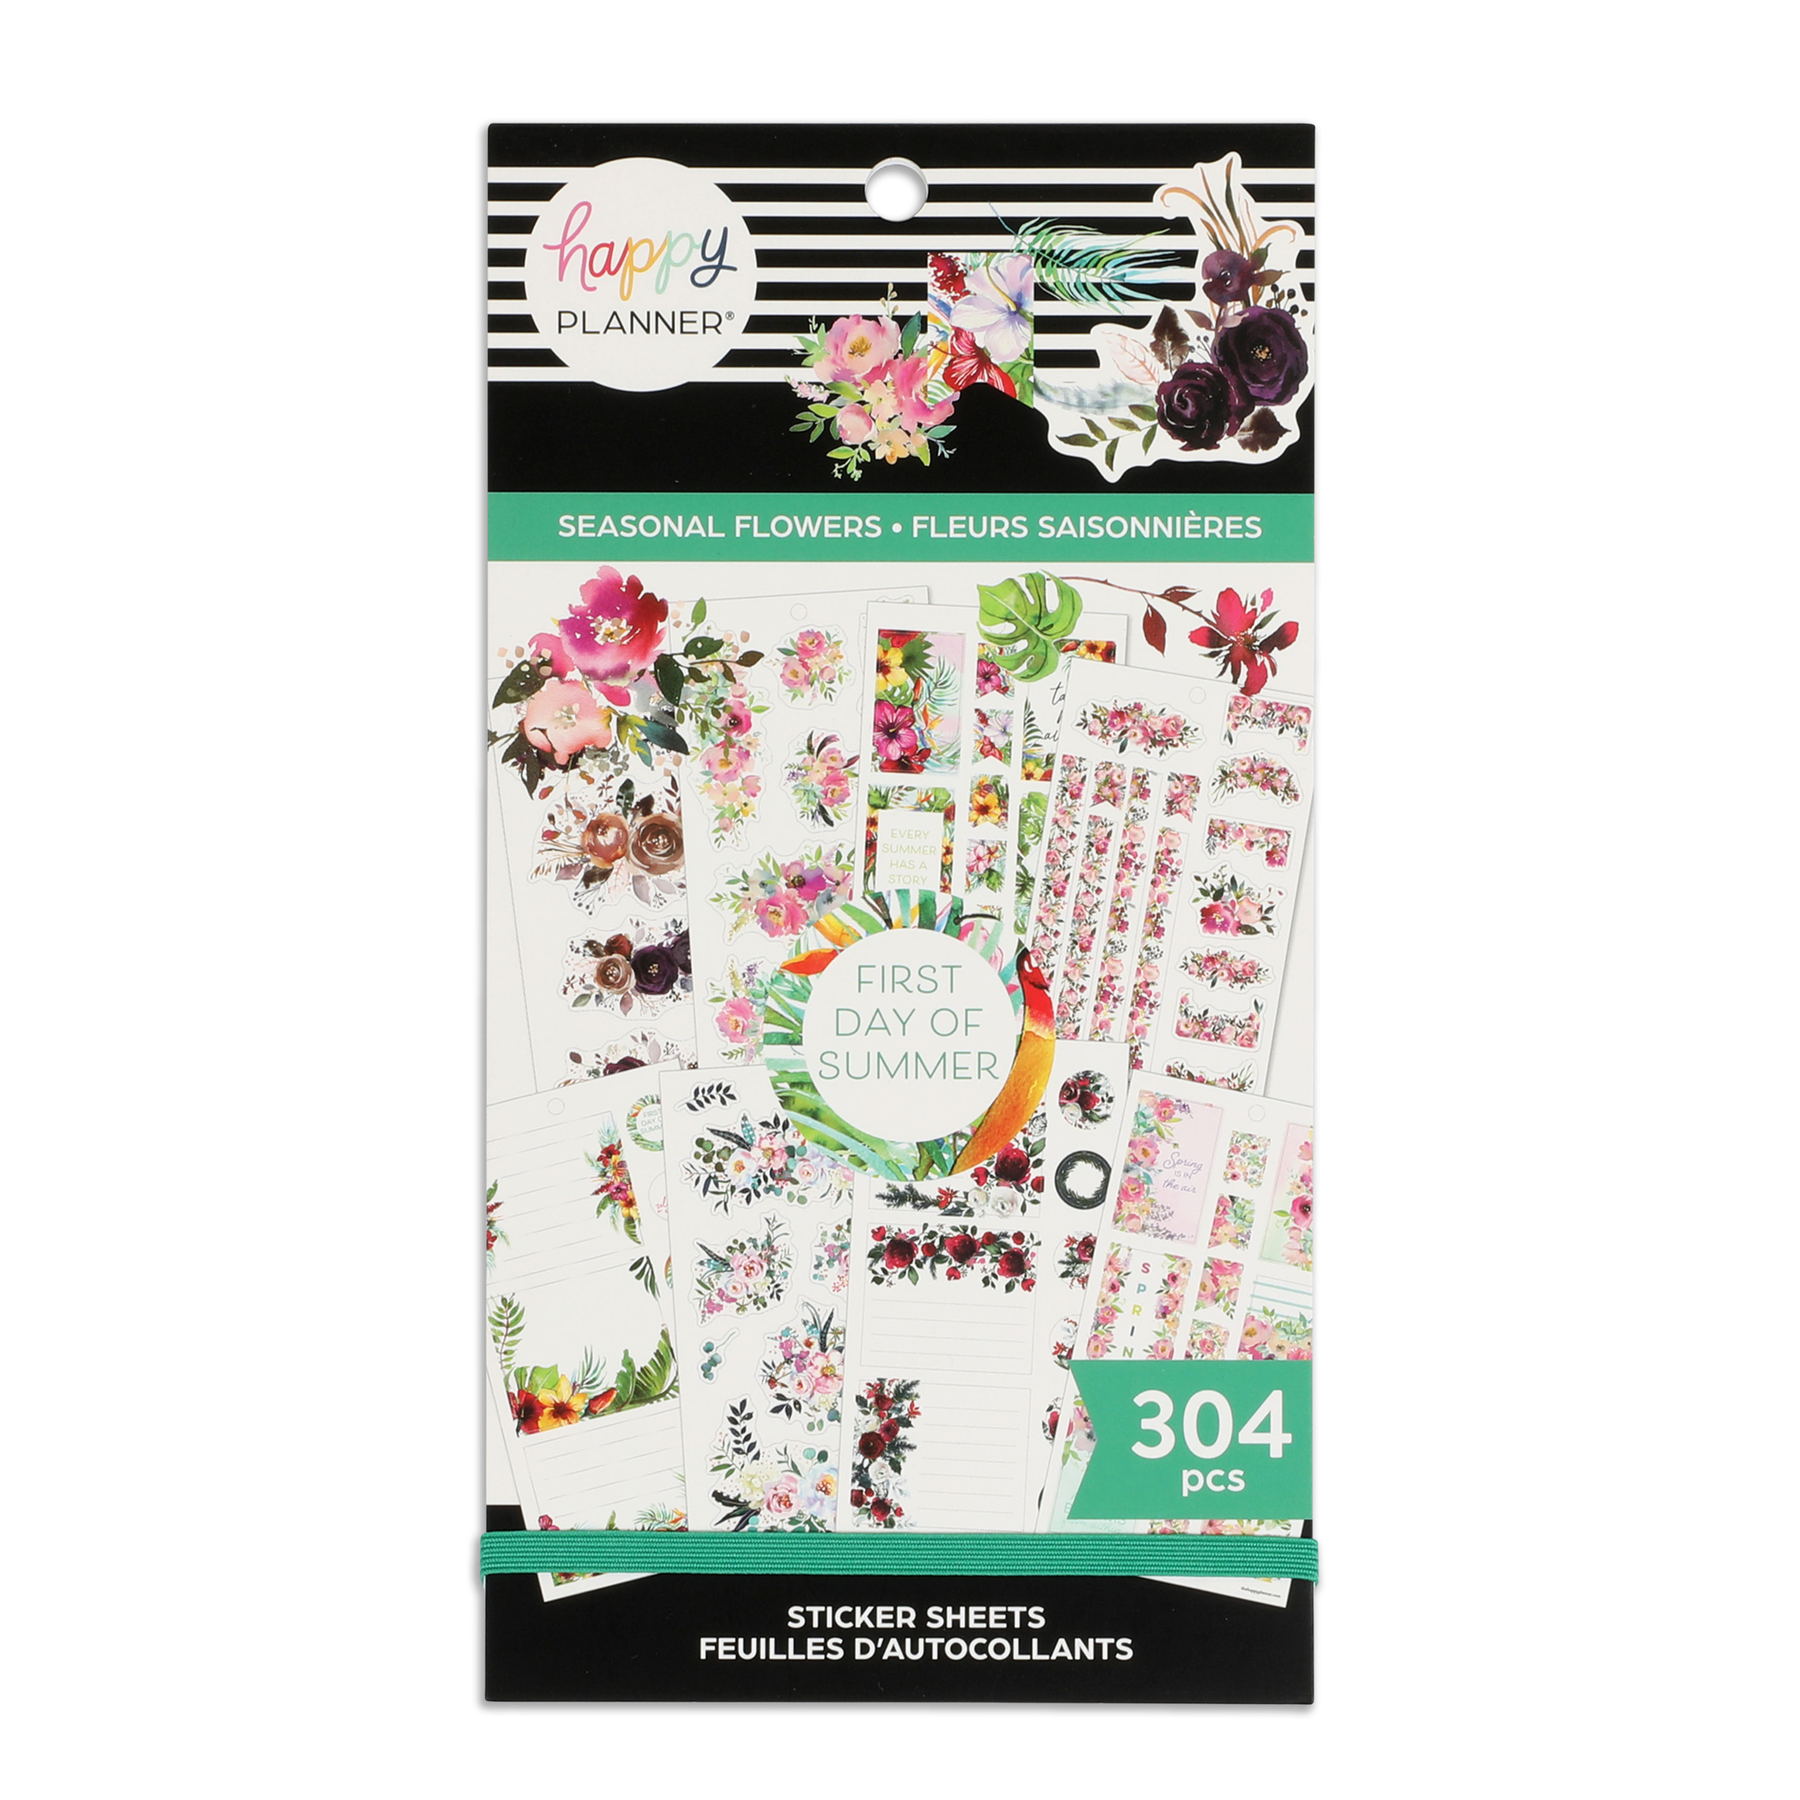 Holiday Variety Sticker Pack Cute Sticker Pack, Variety Stickers, Planner  Sticker Pack, Planner Bundle, Vacation Planner Kit 